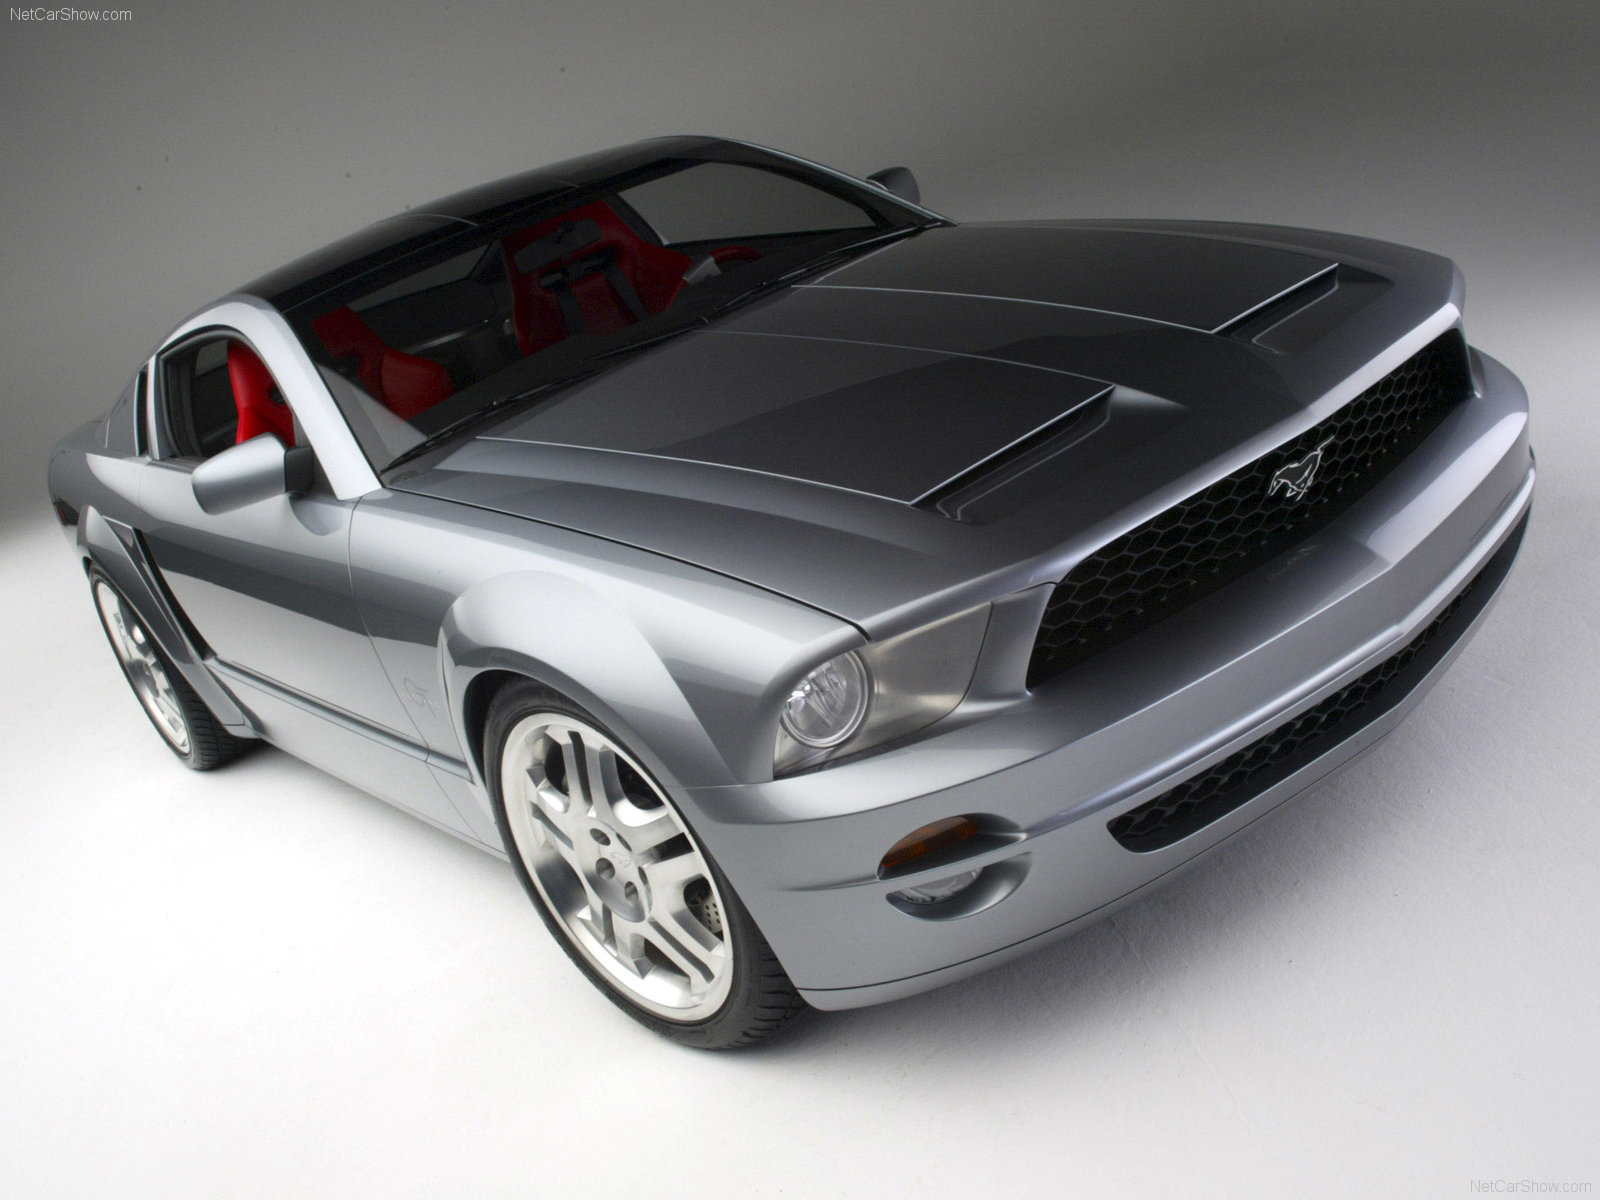 ford, Mustang, Gt, Coupe, Concept, 2003 Wallpaper